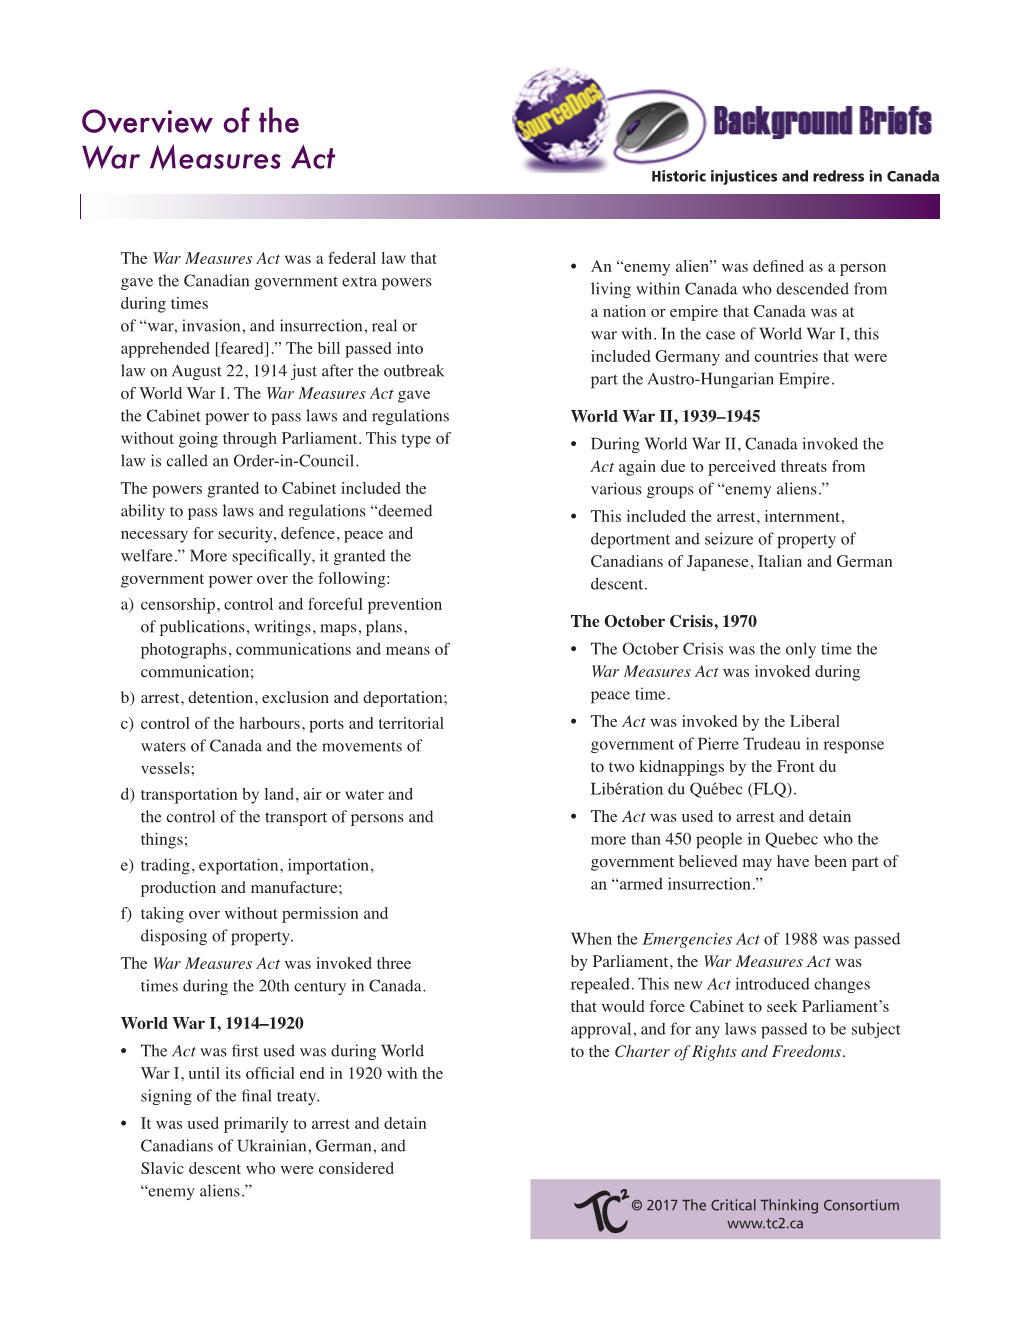 Overview of the War Measures